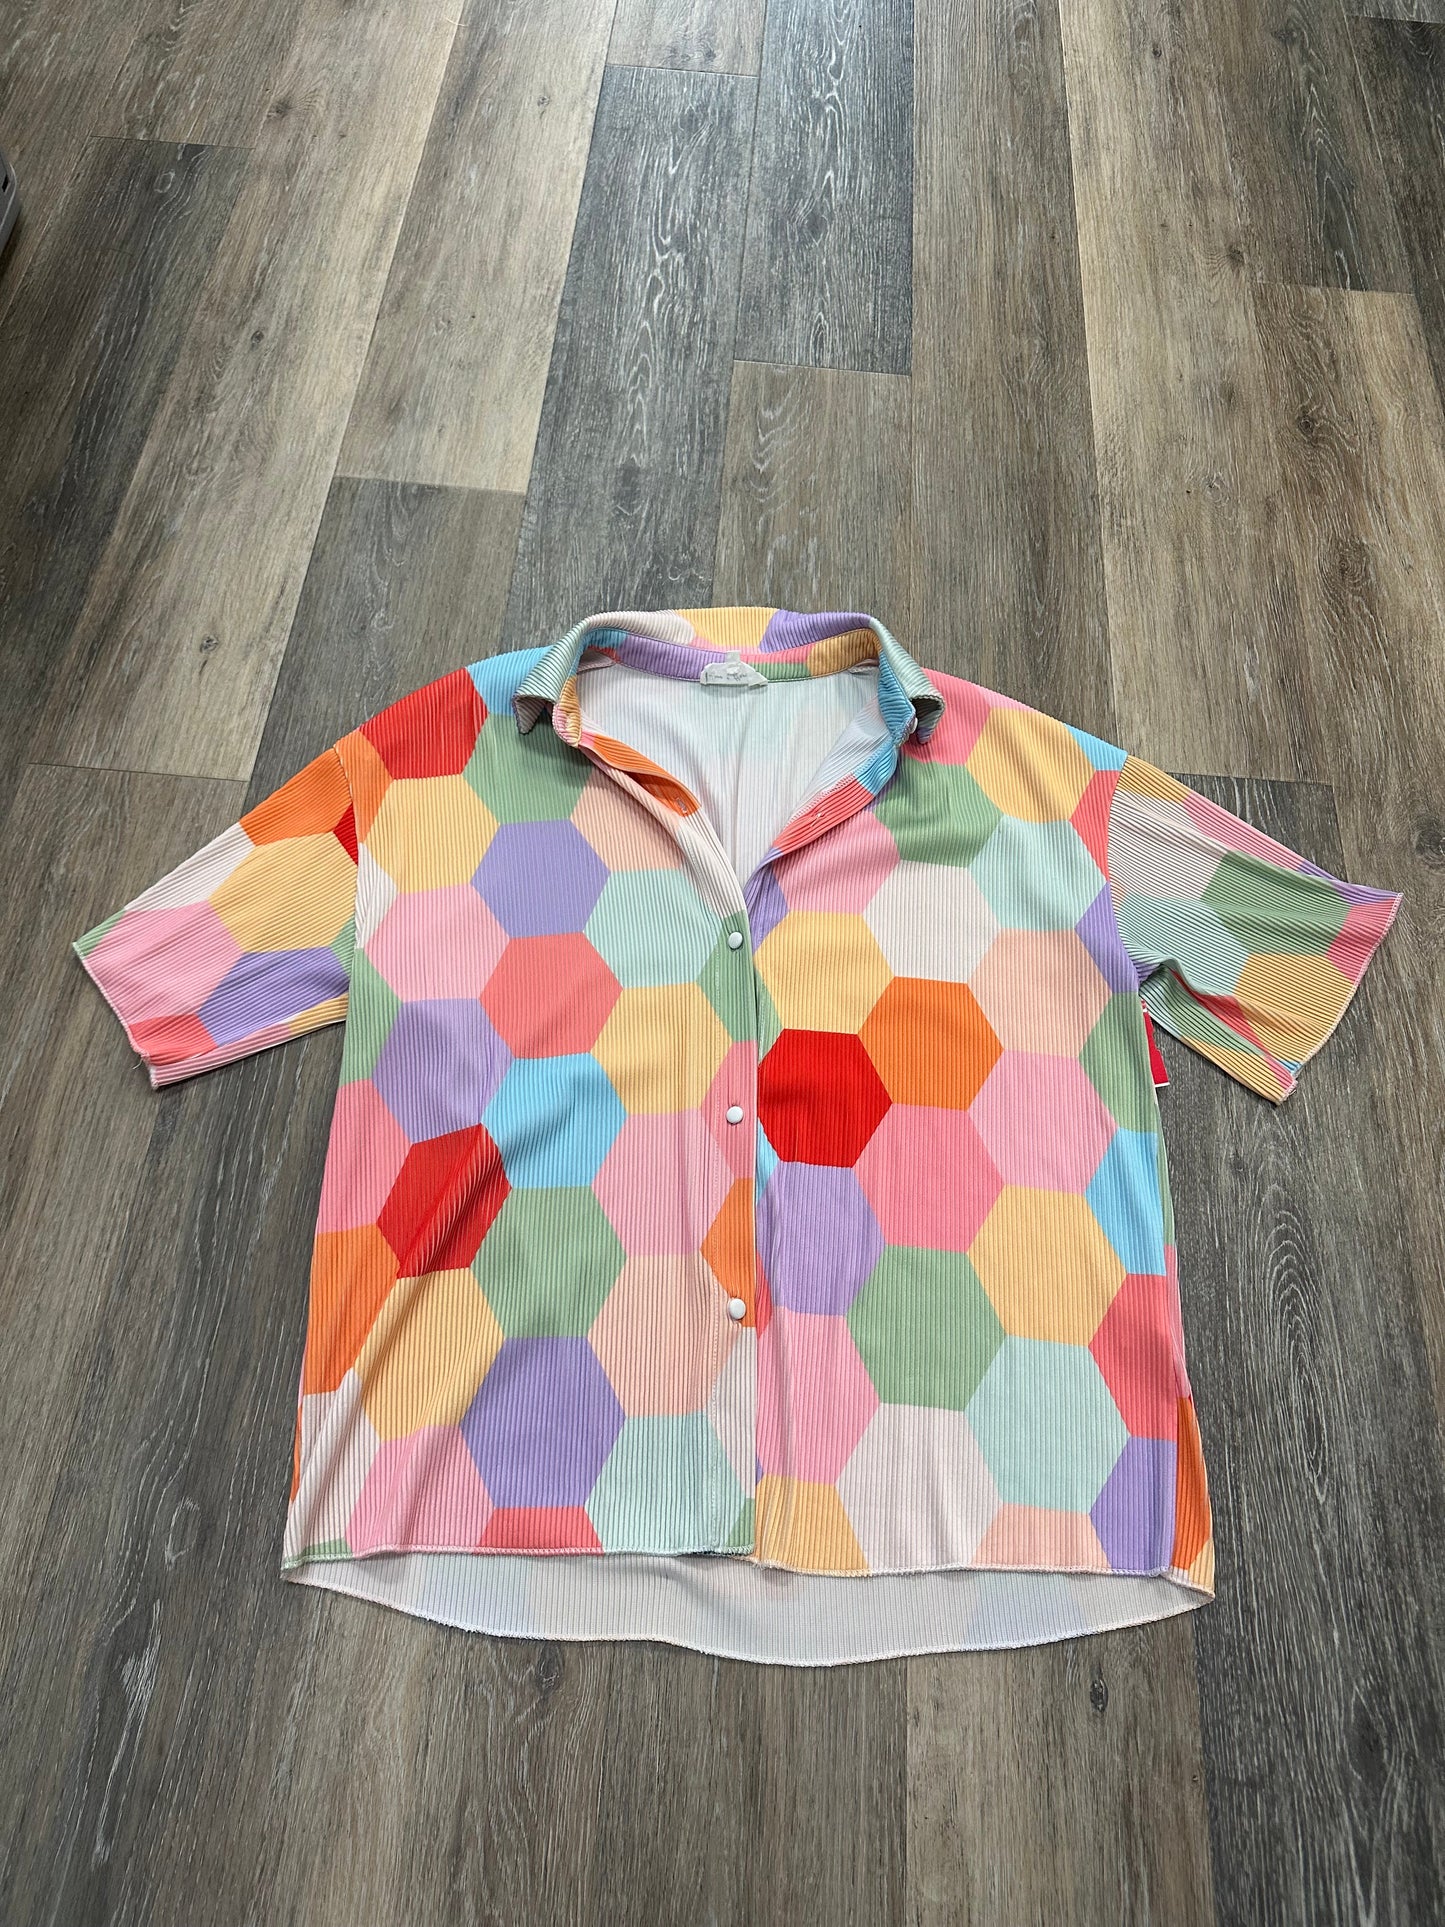 Multi-colored Blouse Short Sleeve Love and Harmony, Size S